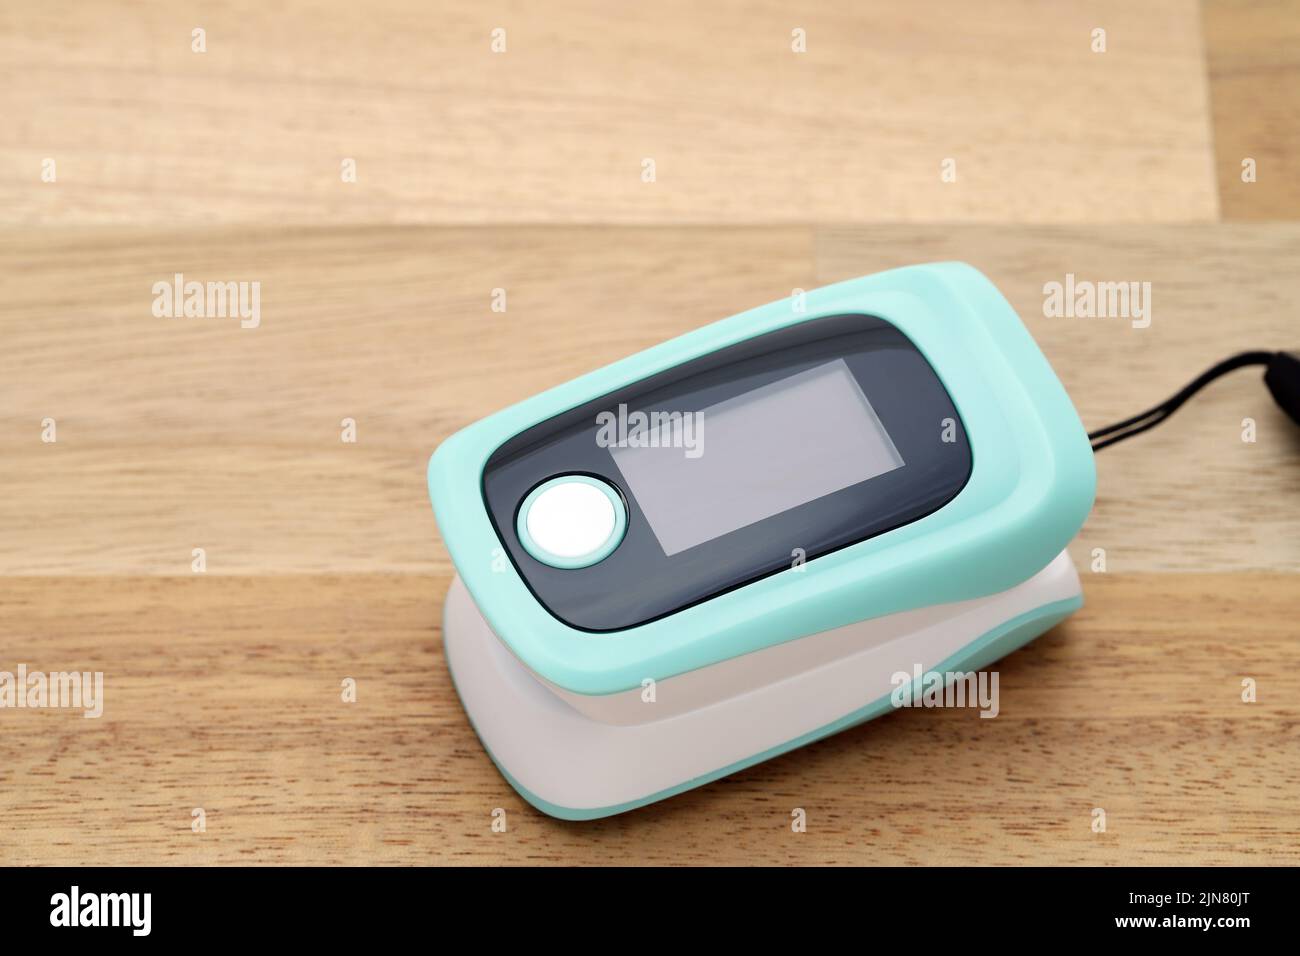 Pulse oximeter device on wooden table, healthcare monitoring concept Stock Photo